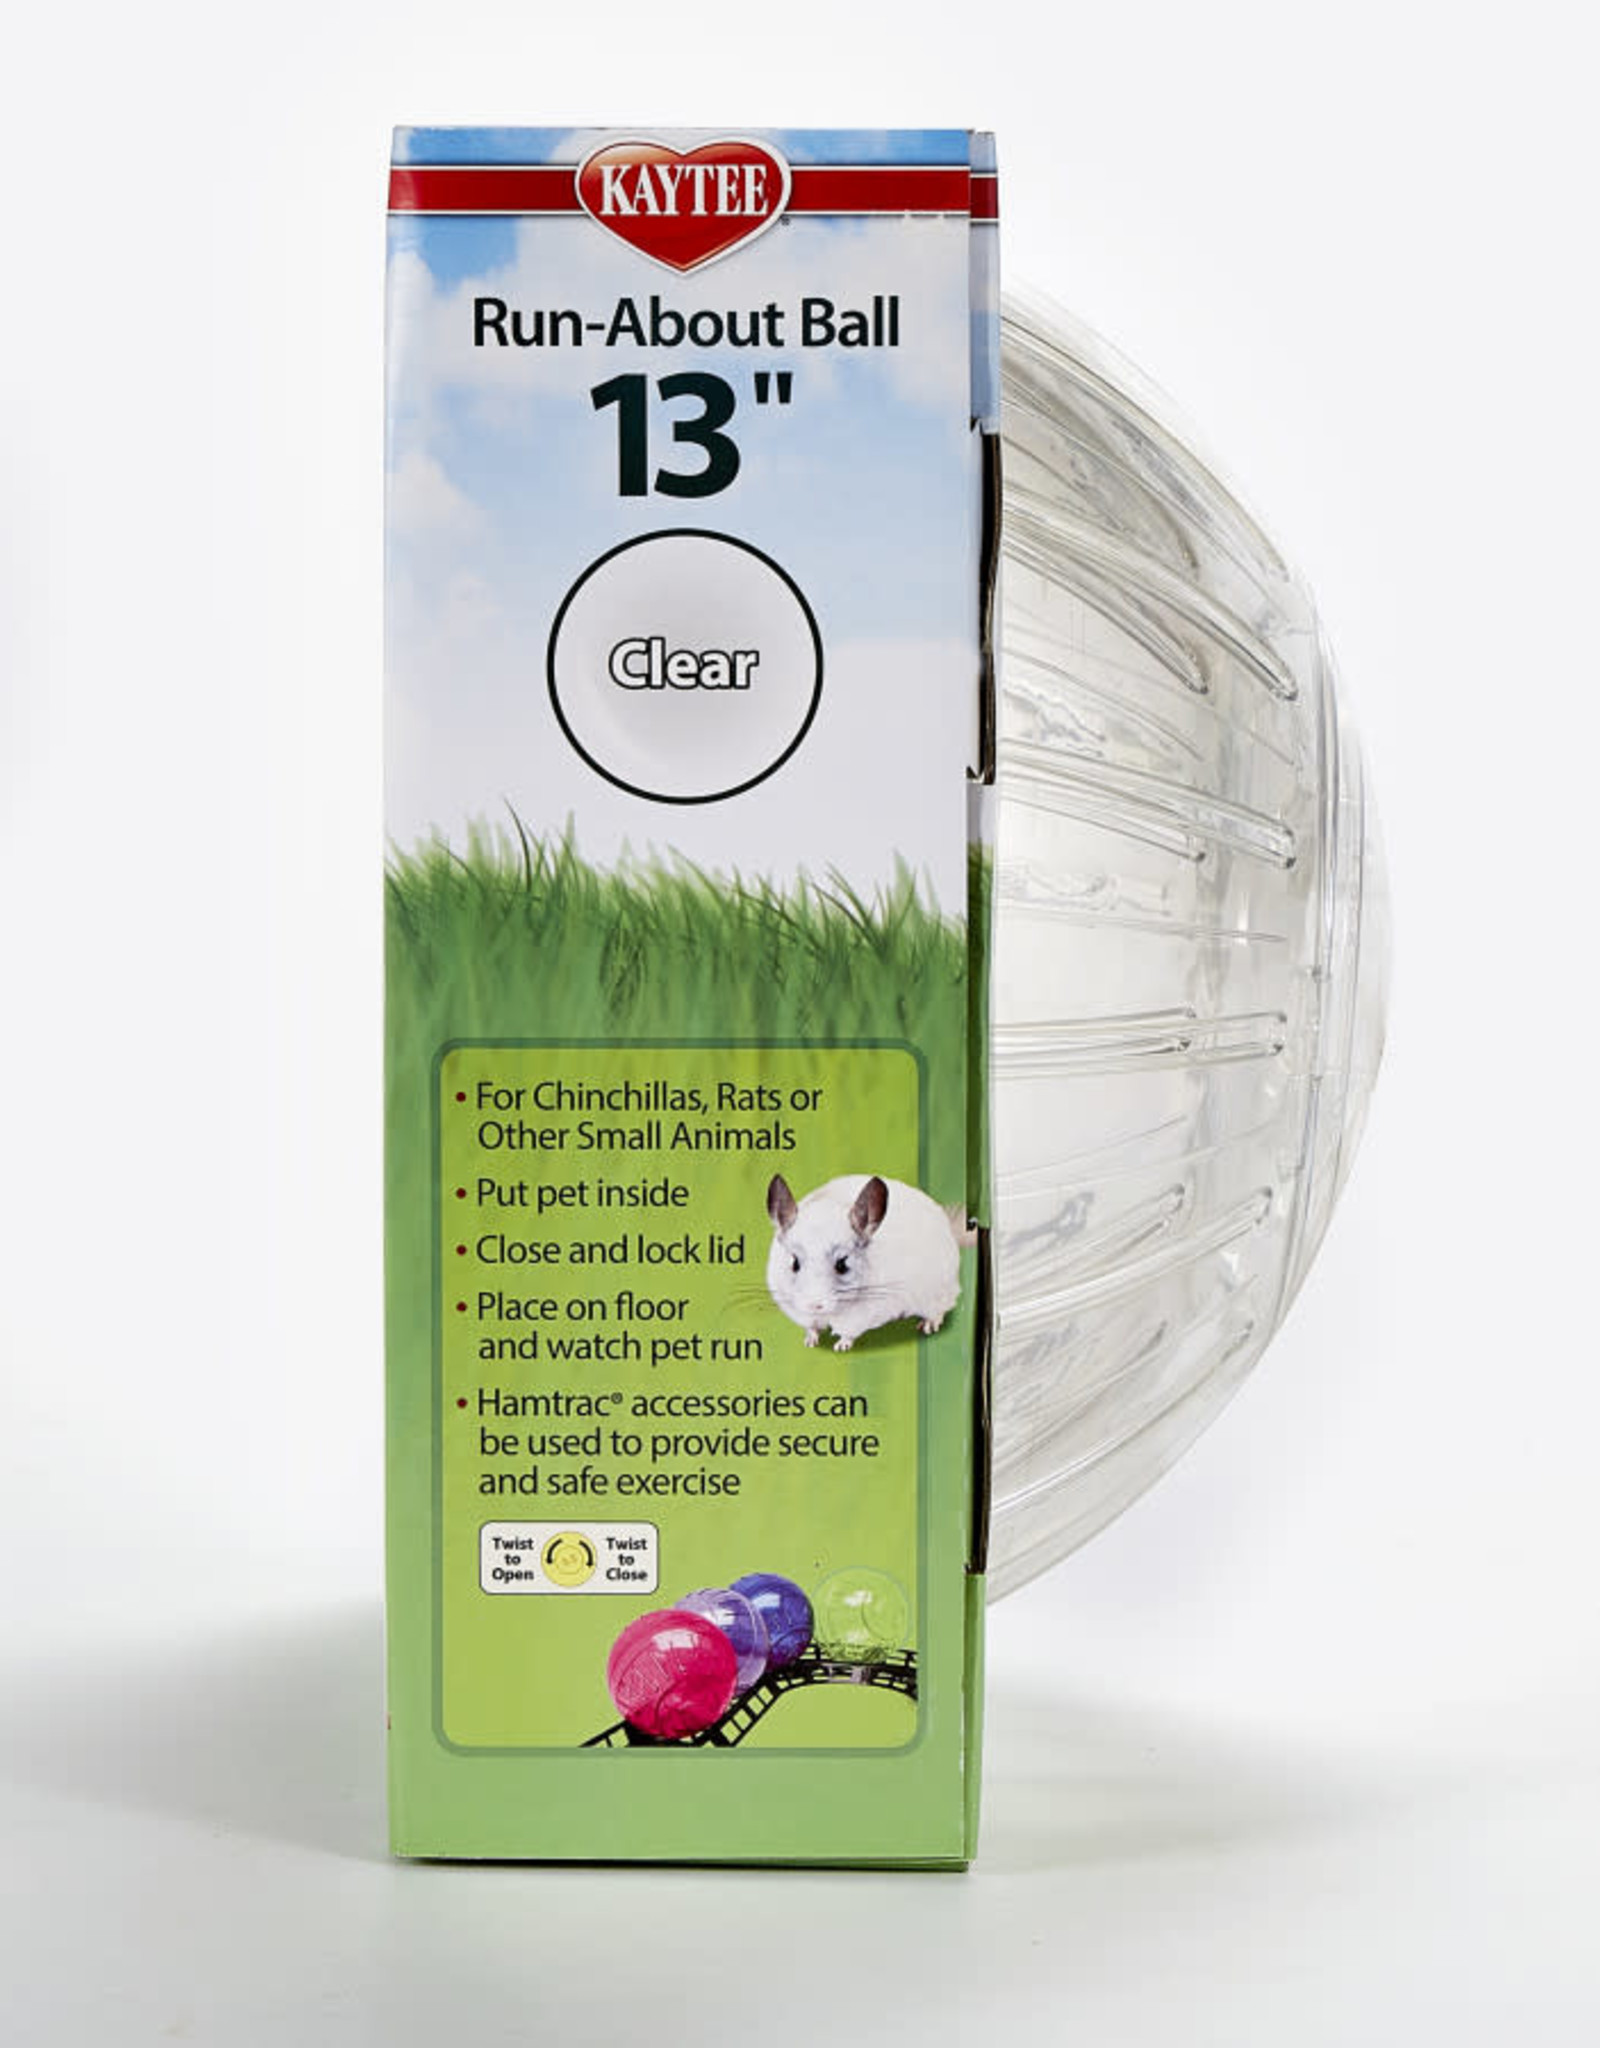 CENTRAL - KAYTEE PRODUCTS SUPER PET- RUN ABOUT BALL- 13 DIA- CLEAR